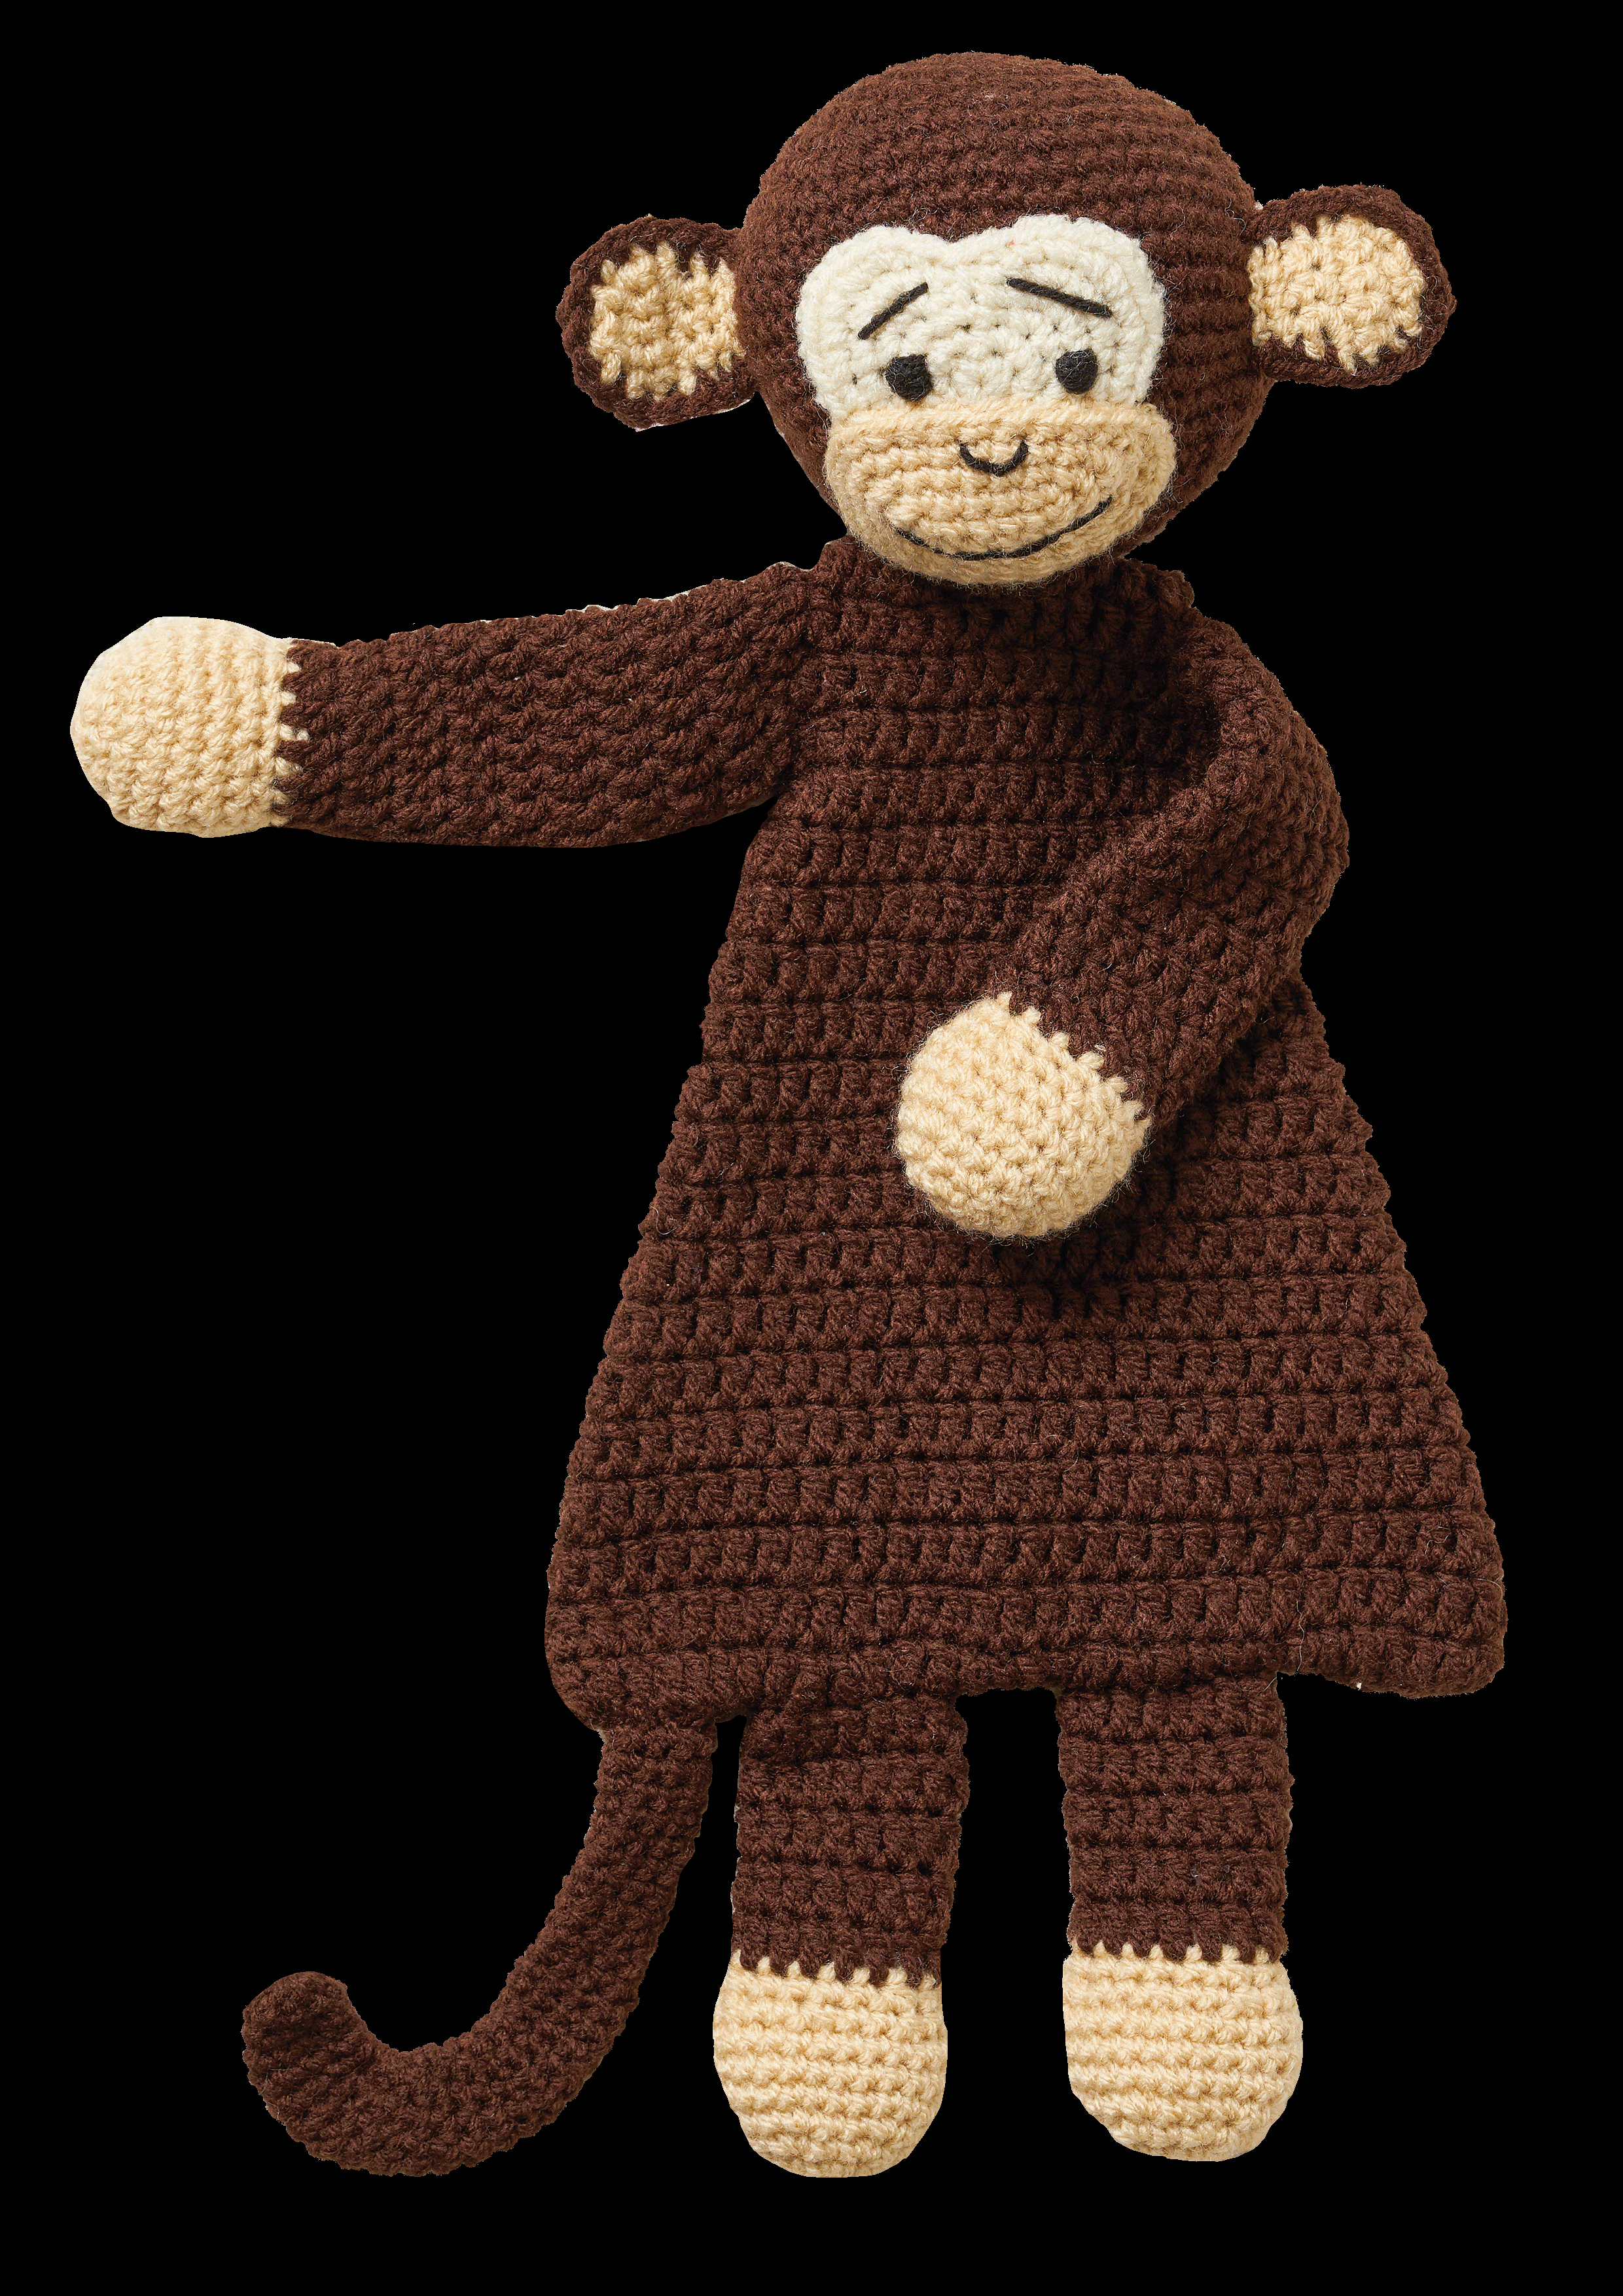 Knitting Patterns For Toys Uk Patons Yarns For Knitting And Crochet Patterns